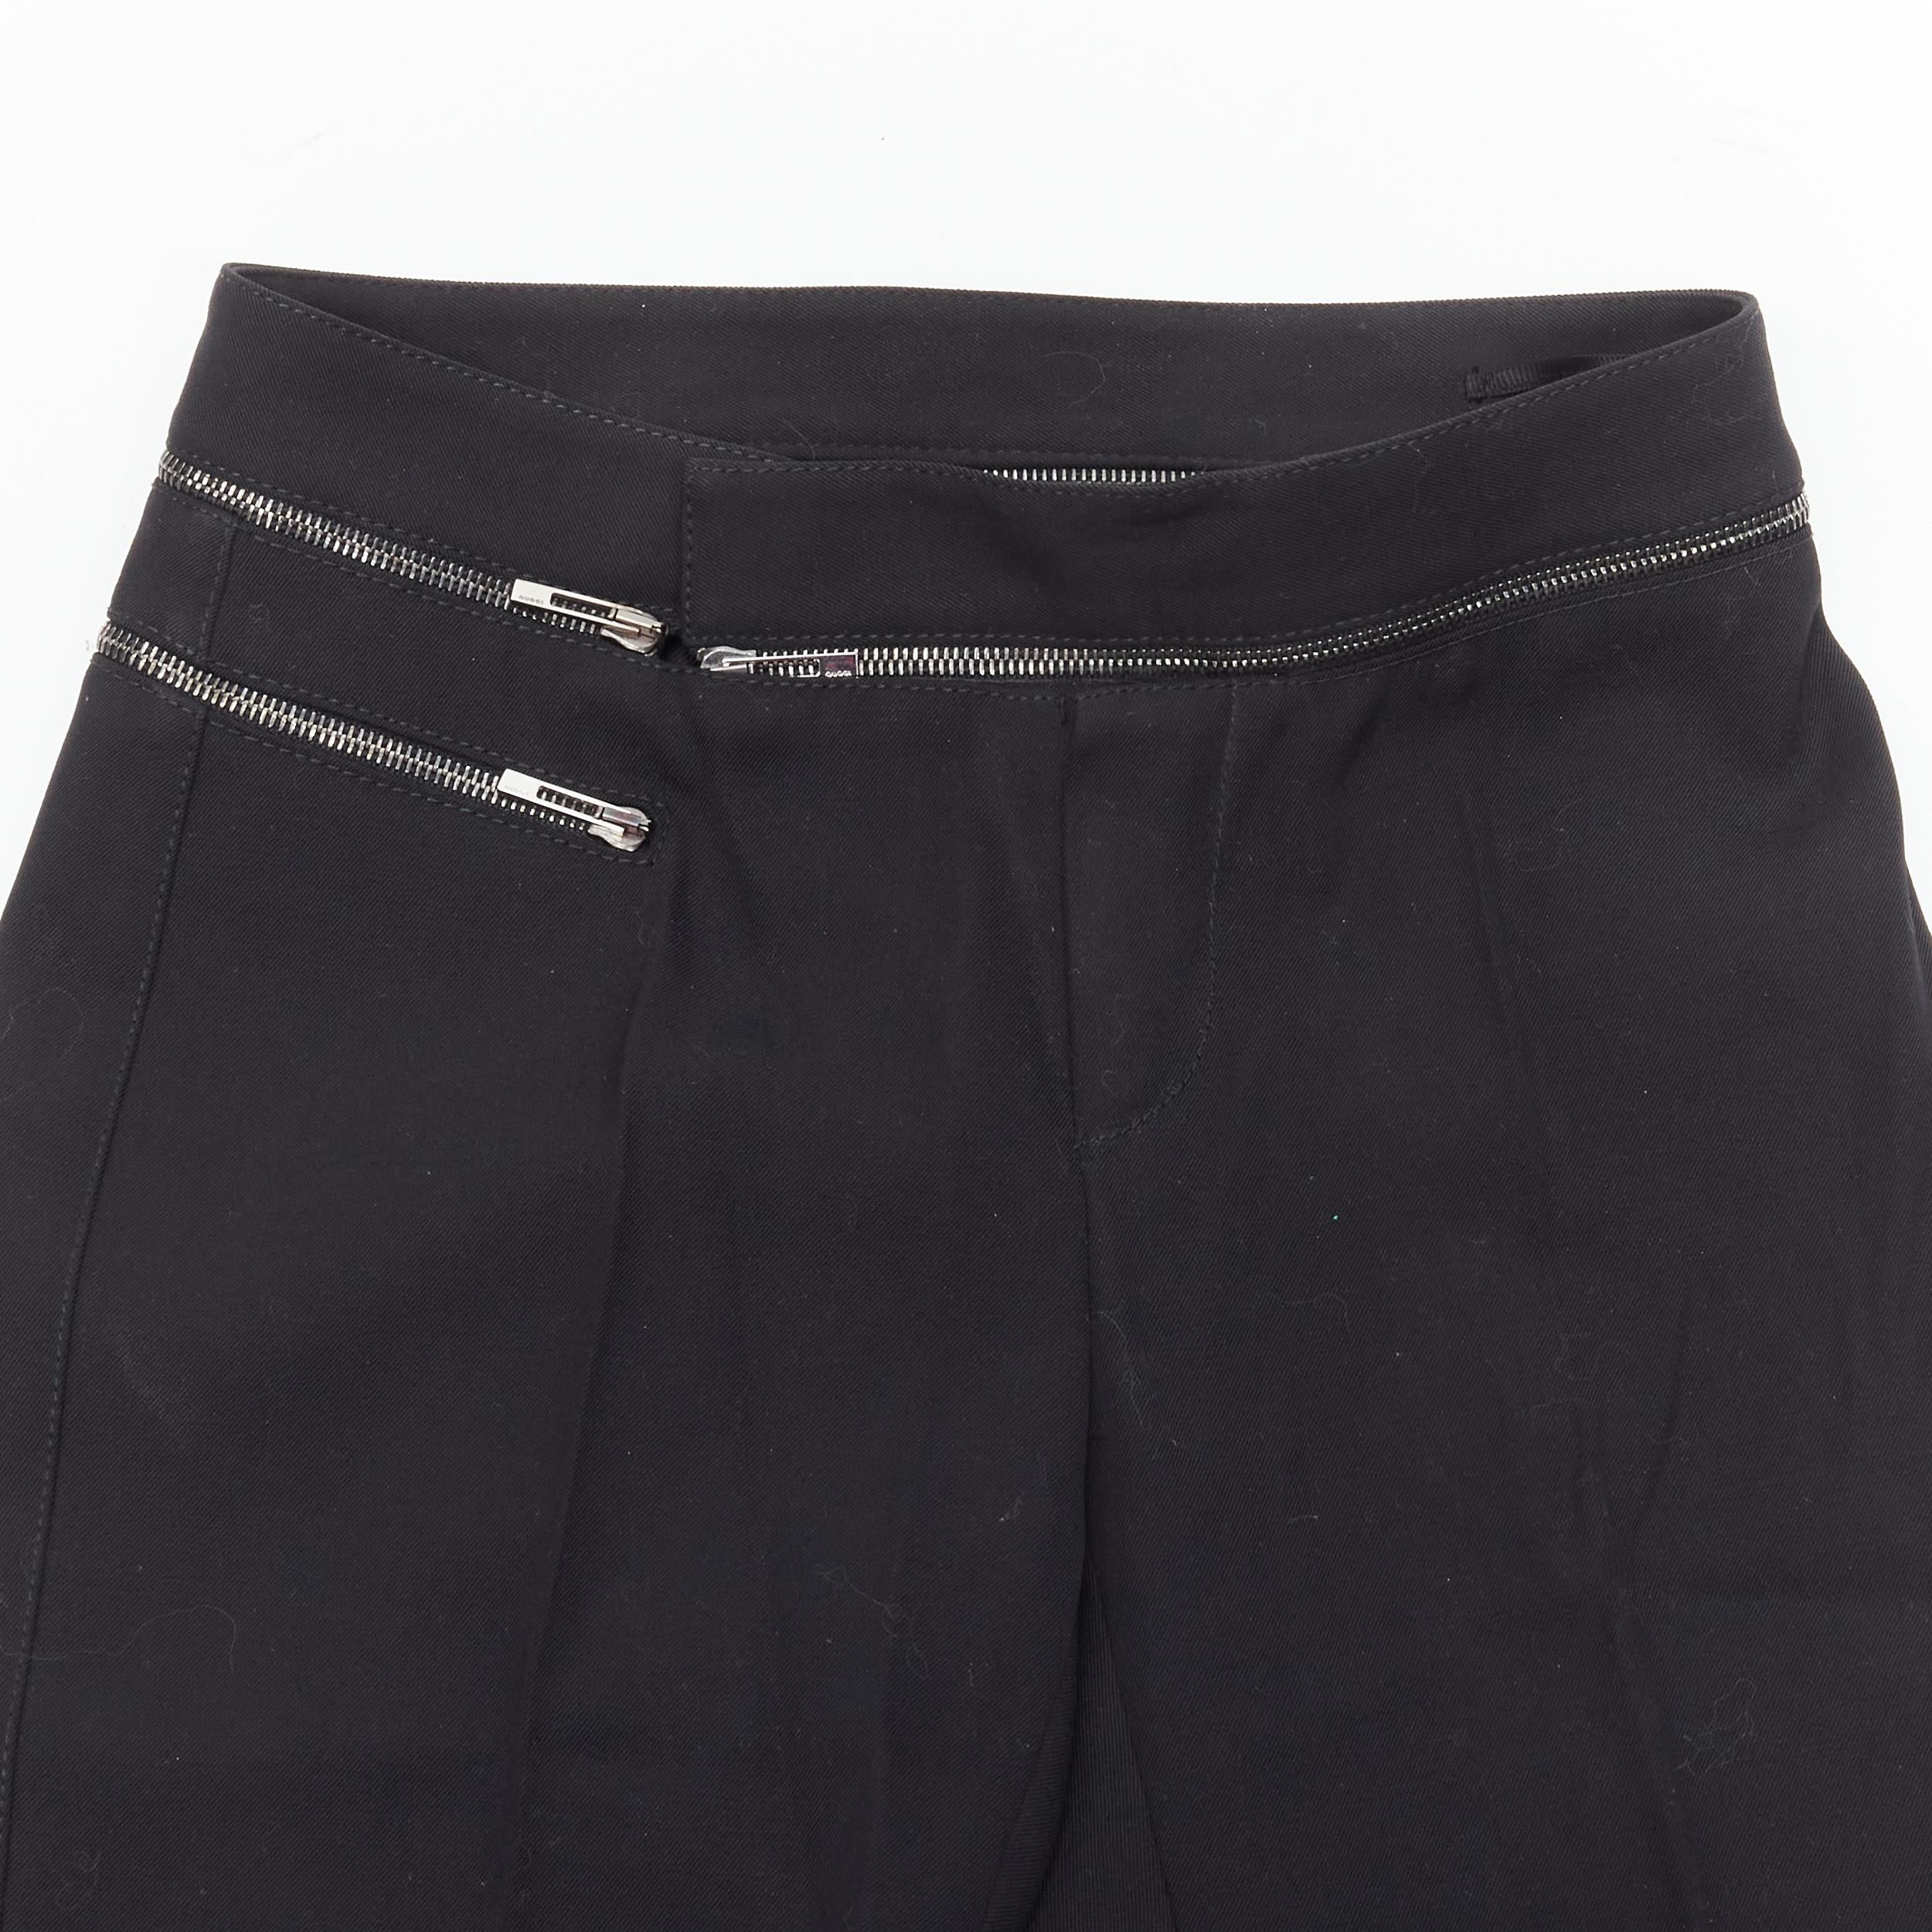 GUCCI black viscose silver waist trim straight leg trousers IT38 XS 
Reference: ANWU/A00549 
Brand: Gucci 
Material: Wool 
Color: Black 
Pattern: Solid 
Closure: Zip 
Extra Detail: Zip around detailing along waist band. Side zip pockets. 
Made in: